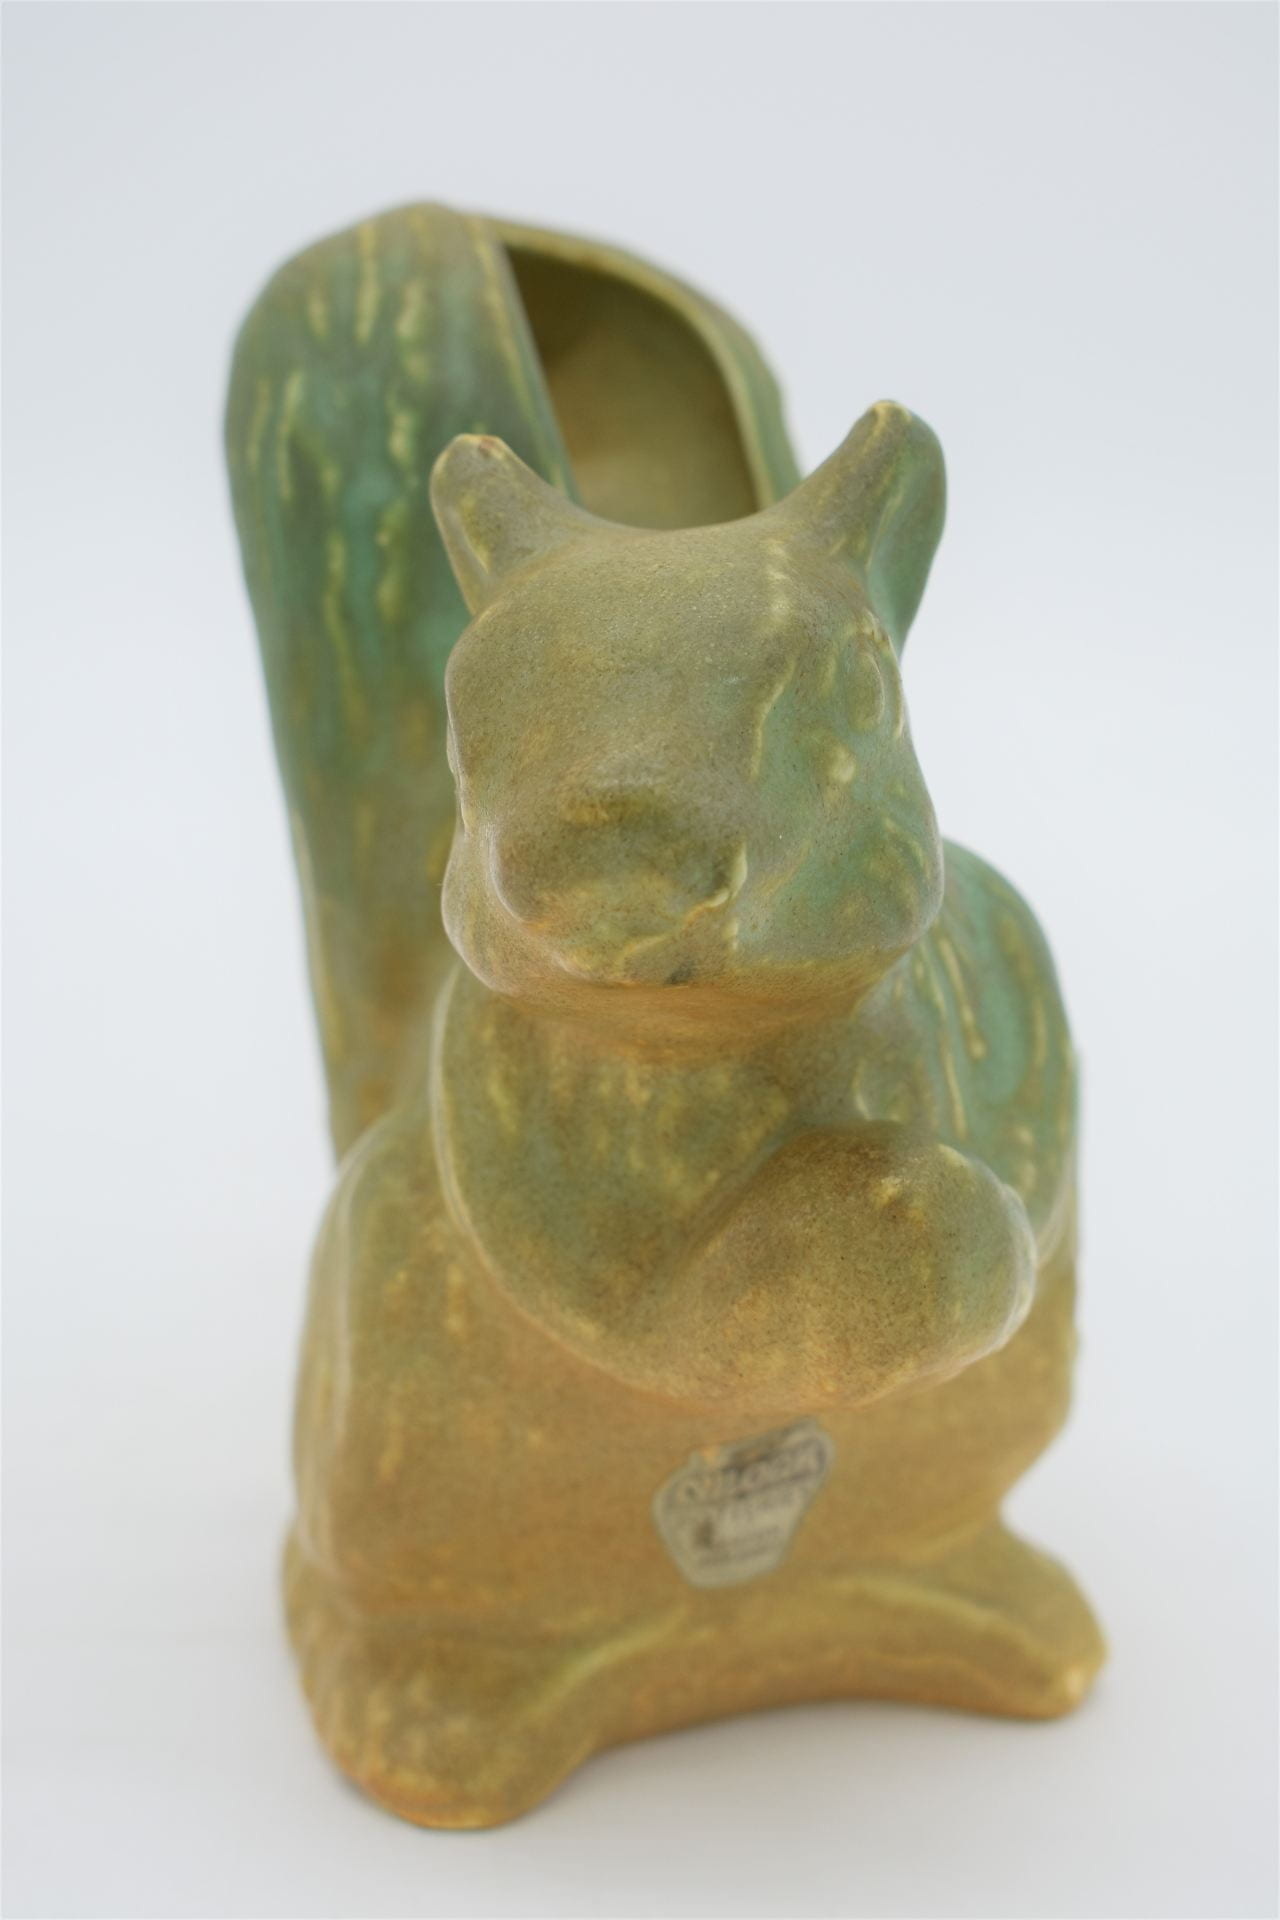 A ceramic vase in the shape of squirrel. The piece is an ombre shade, from dark green at top of head and tail down to yellow at the feet.